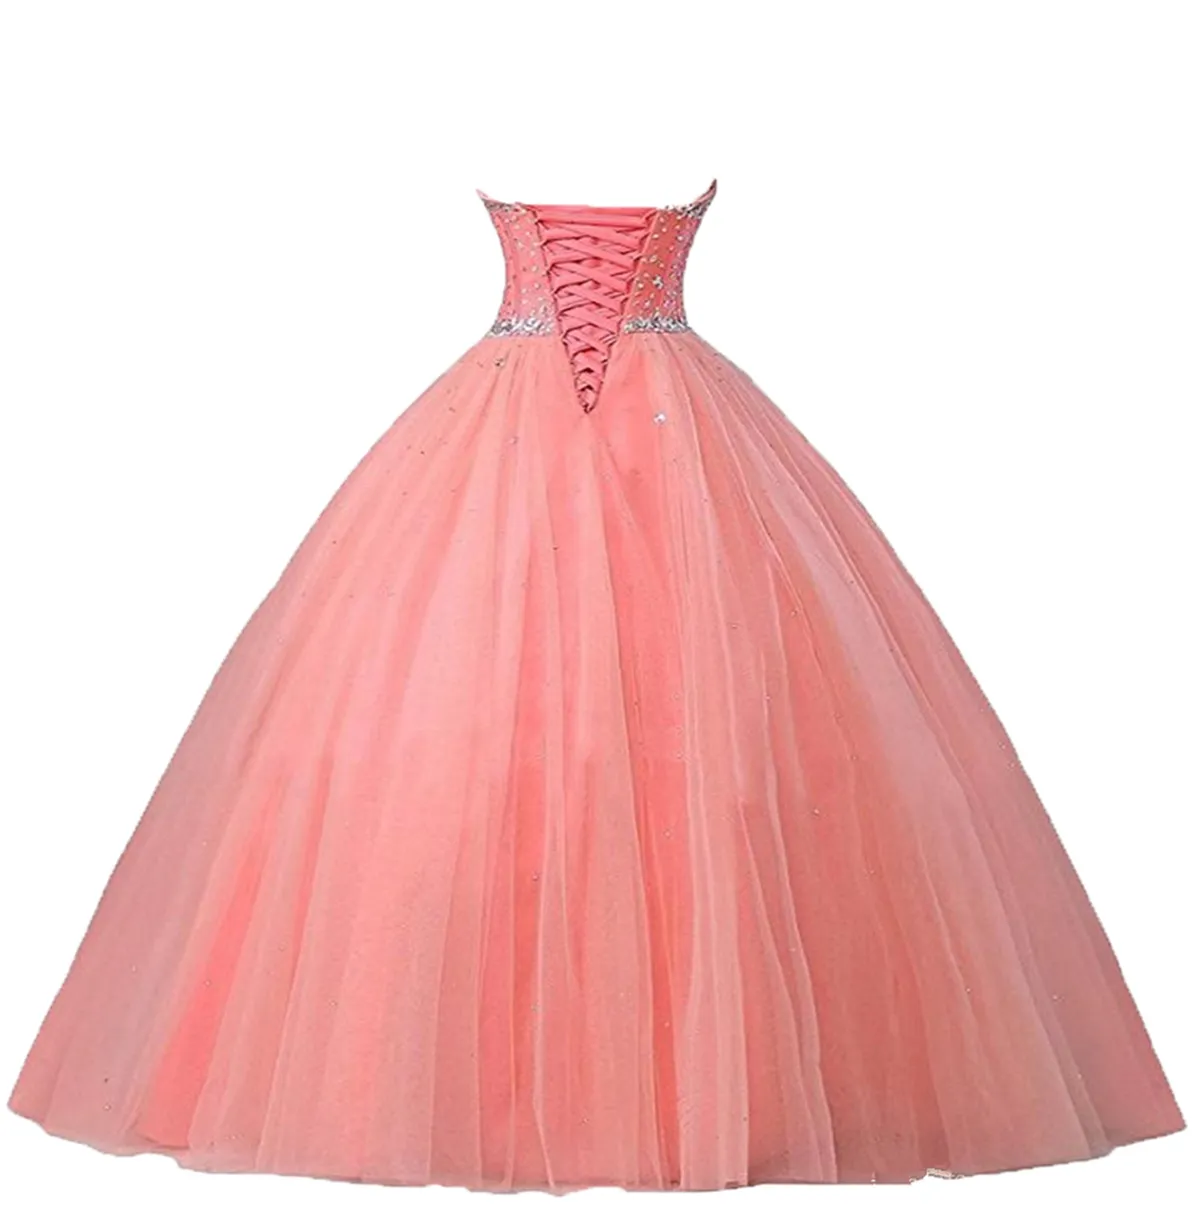 2021 Sexy Pink Coral Ball Gown Quinceanera Dresses with Beaded Sweet 16 Dress Lace Up Floor Length Detachable Vestido De Festa QC112